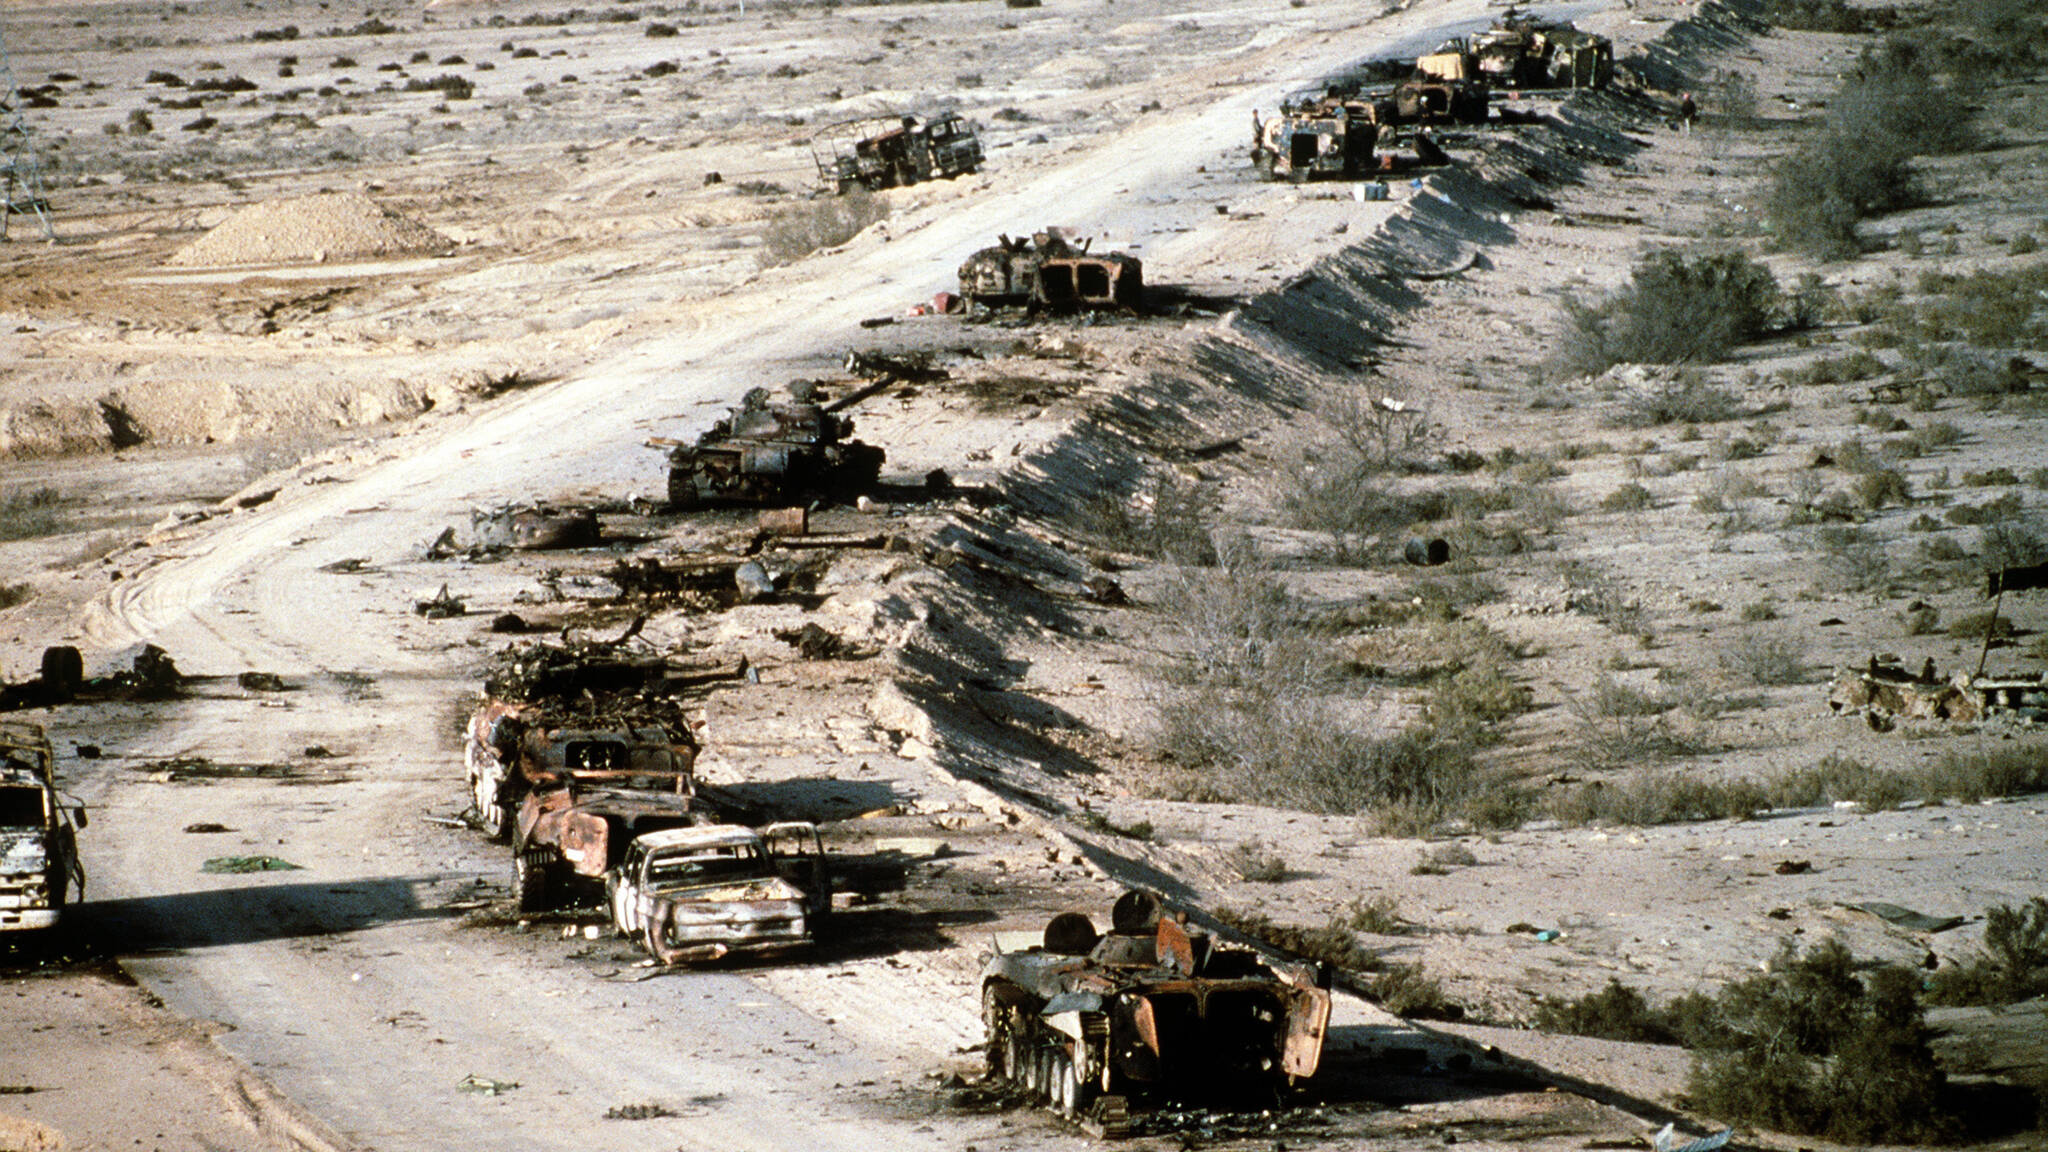 Destroyed Iraqi tanks and vehicles after Highway of Death attack, United States military photo